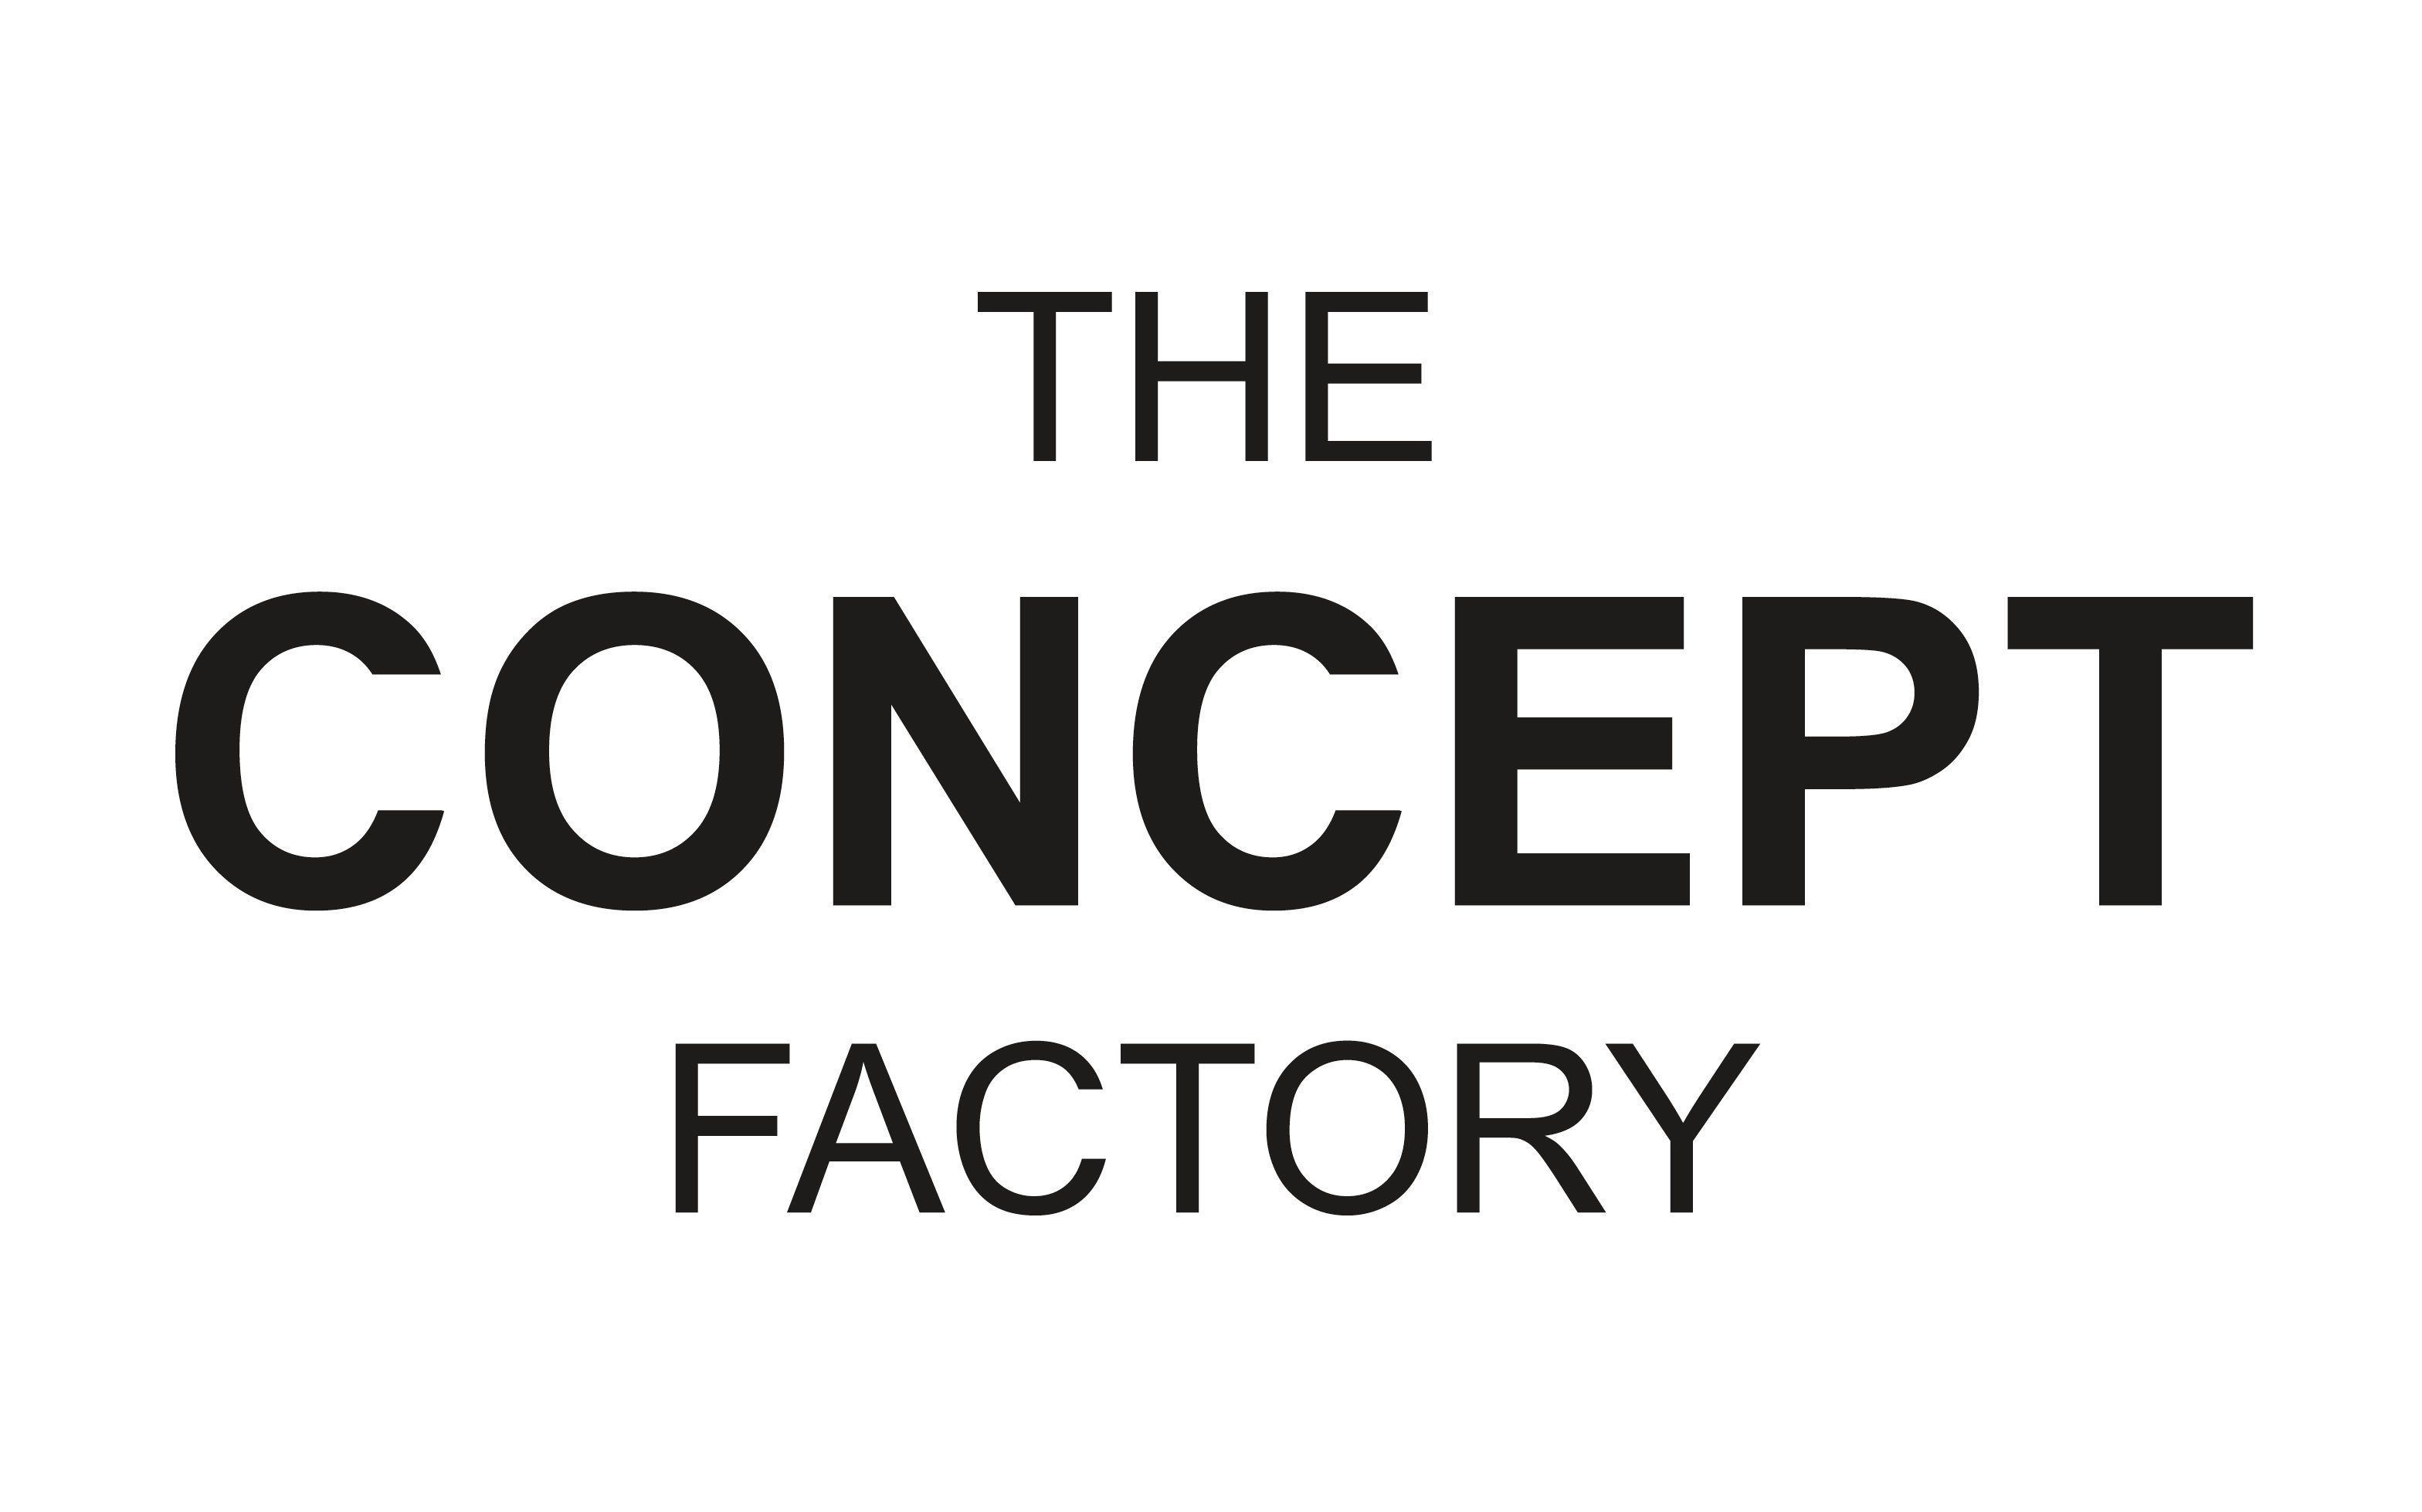 THE CONCEPT FACTORY